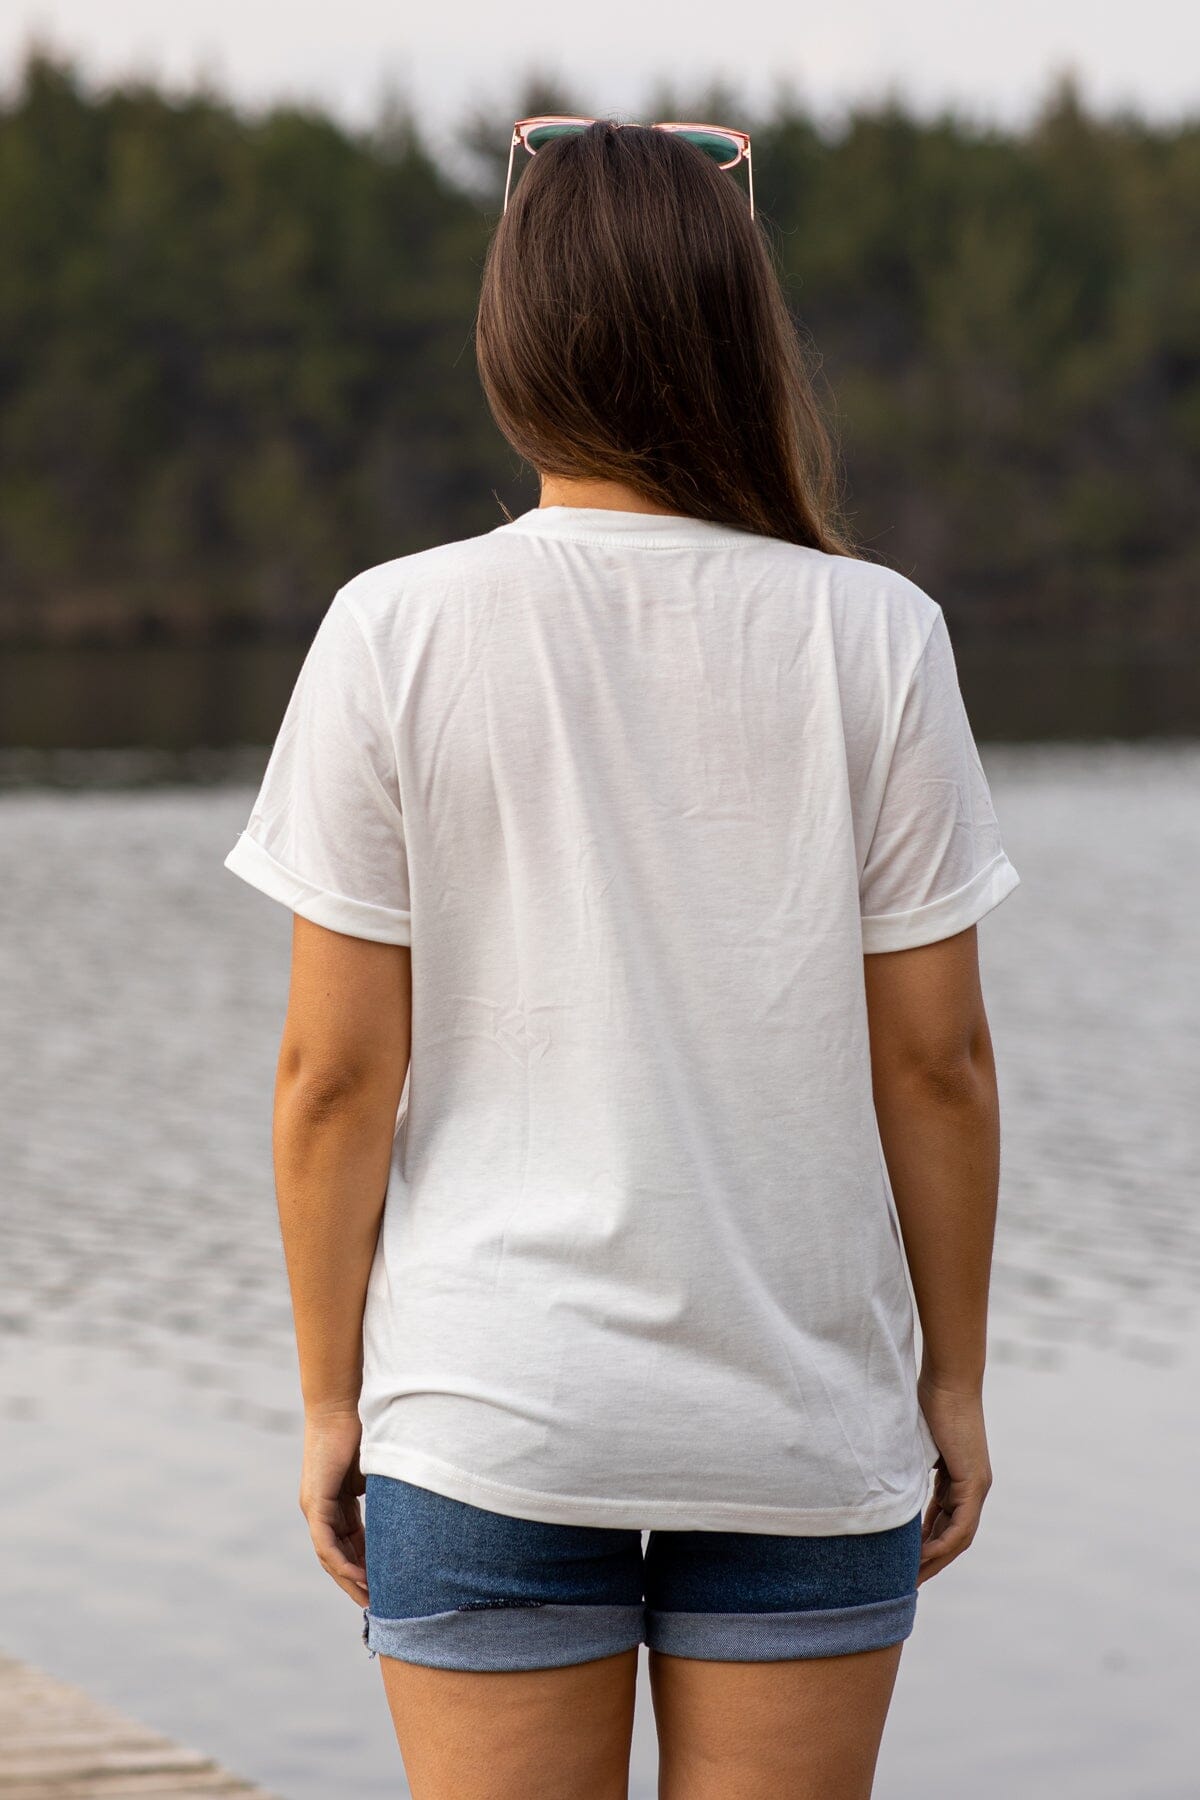 White Lazy Lake Day Graphic Tee - Filly Flair